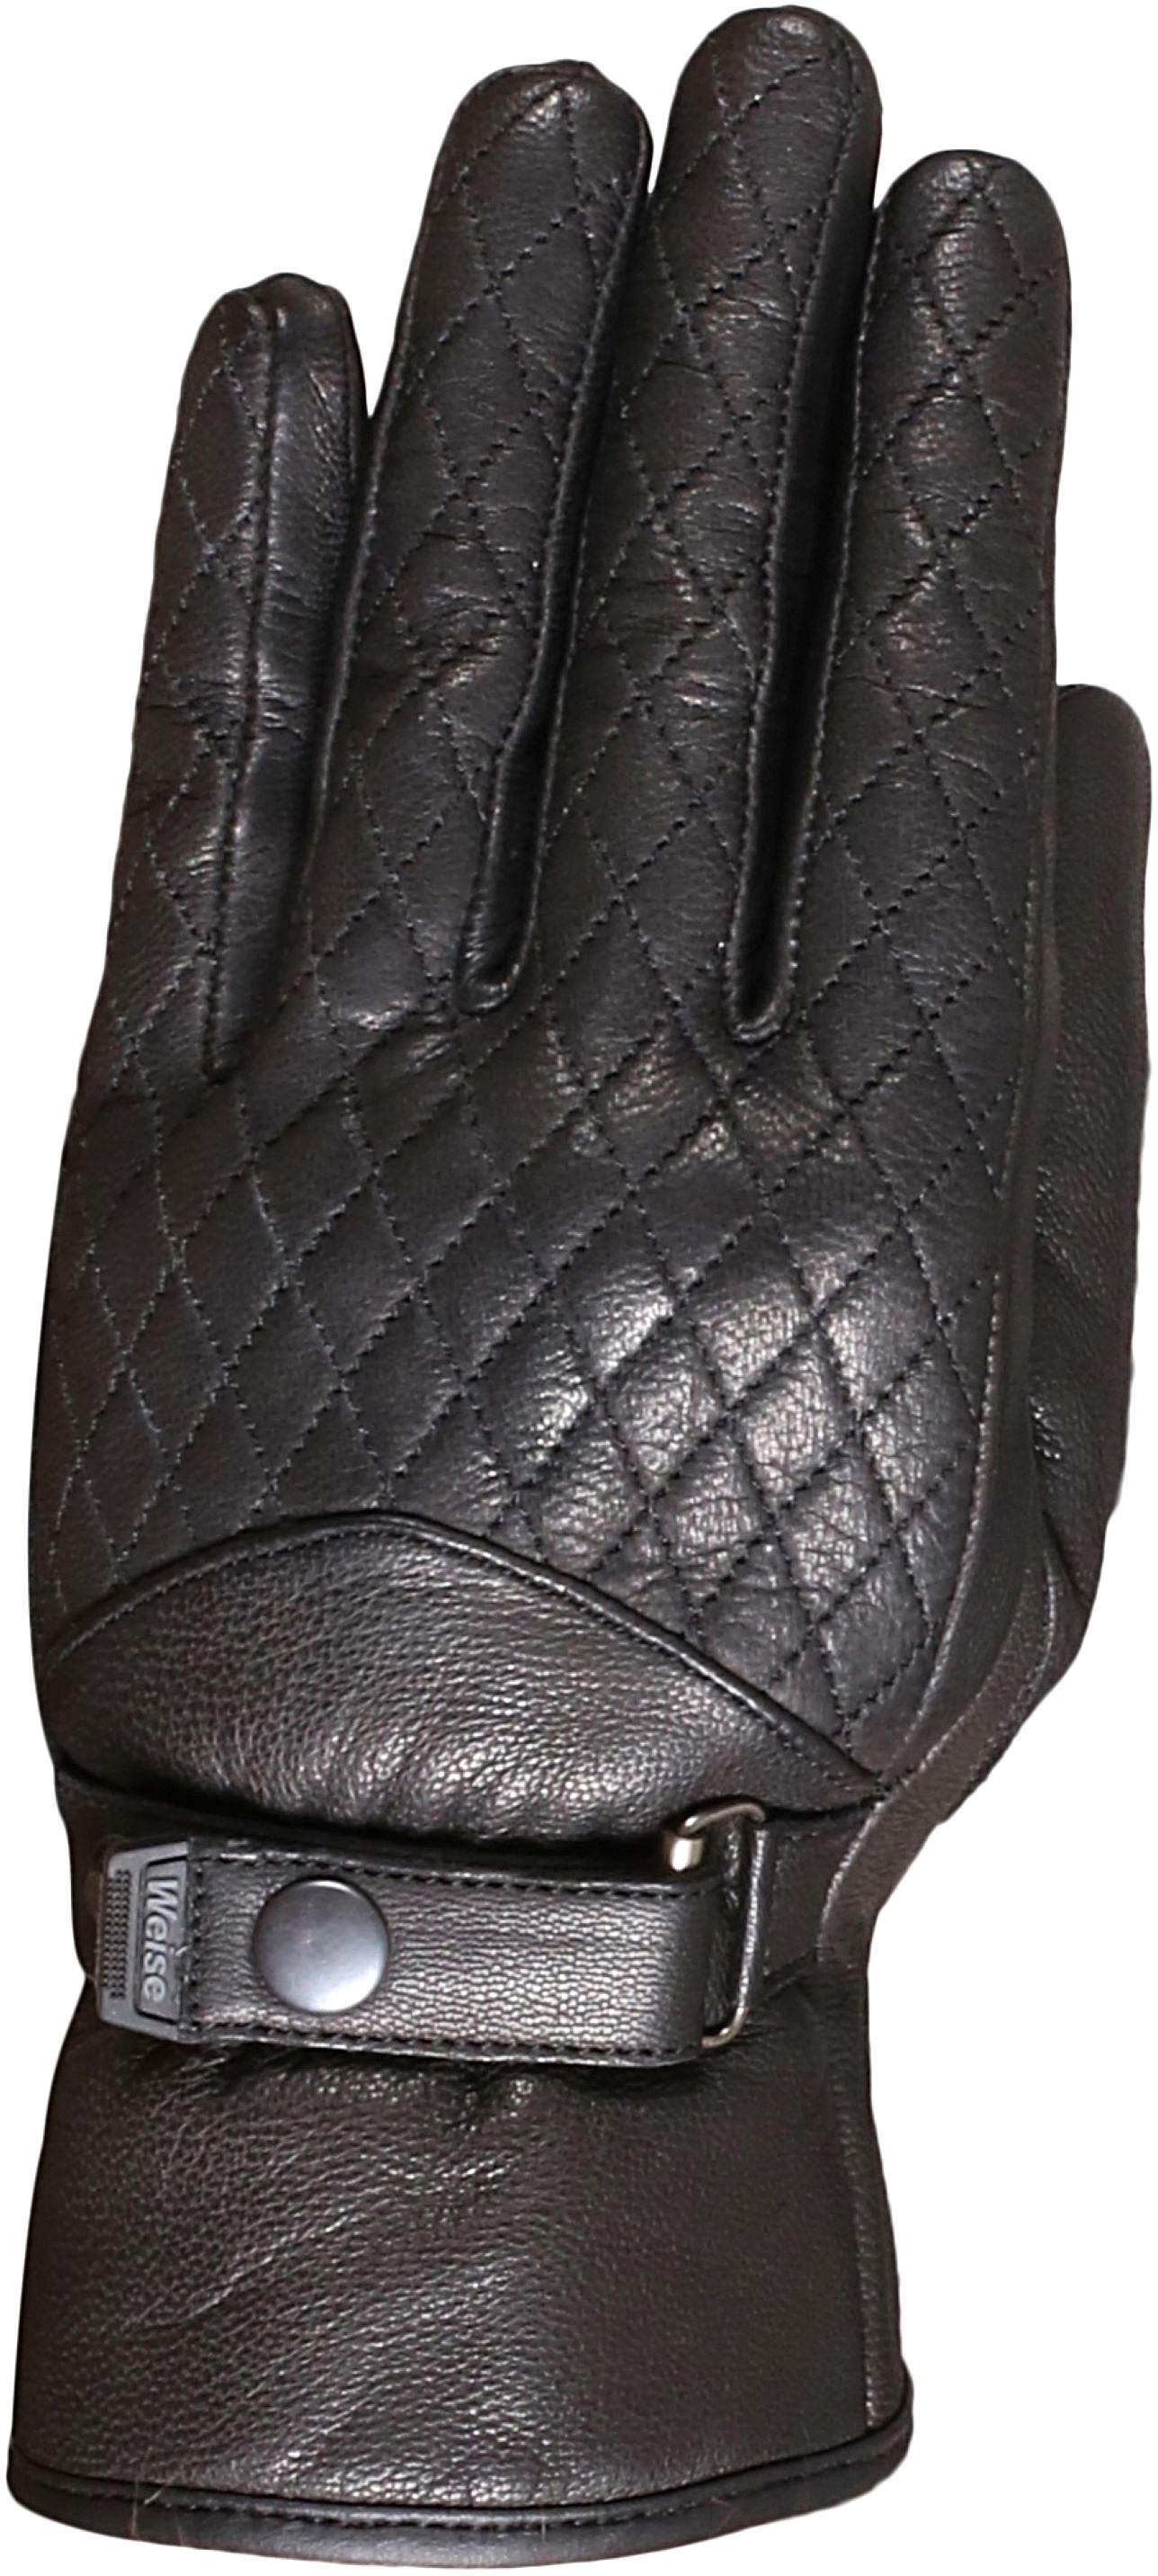 Weise Halo Womens Motorcycle Gloves - Black, M